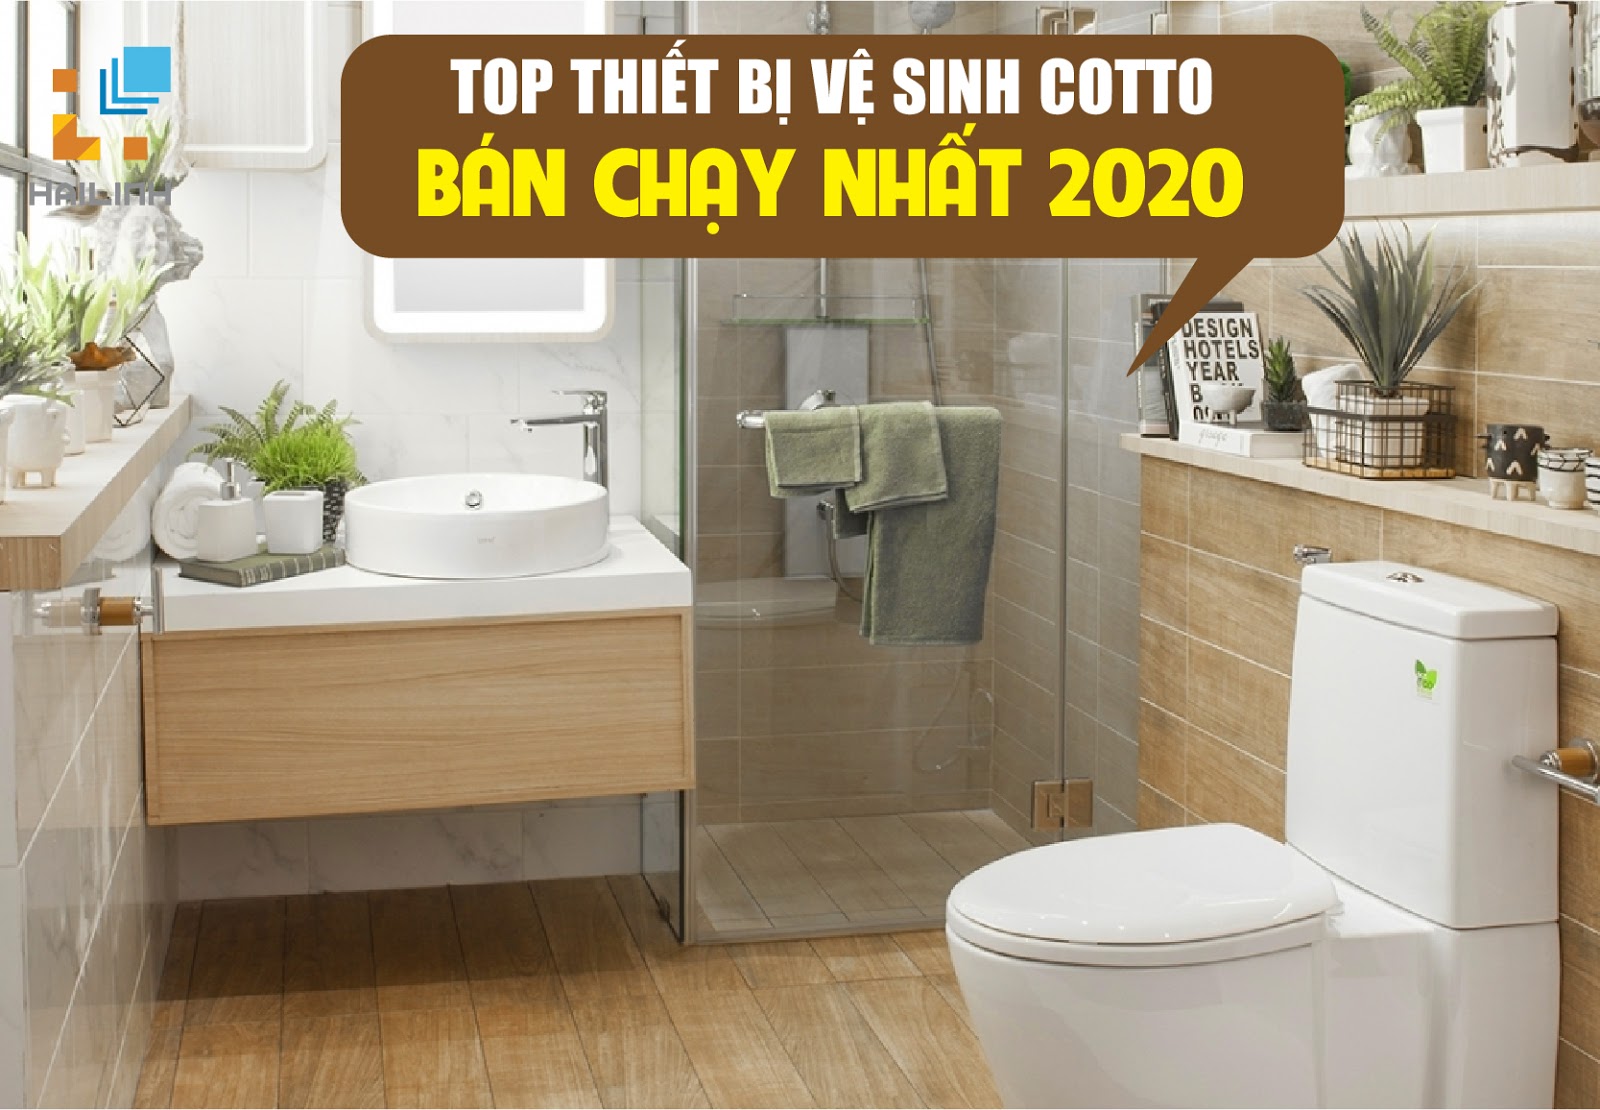 TOP cac thiet bi ve sinh cotto ban chay nhat